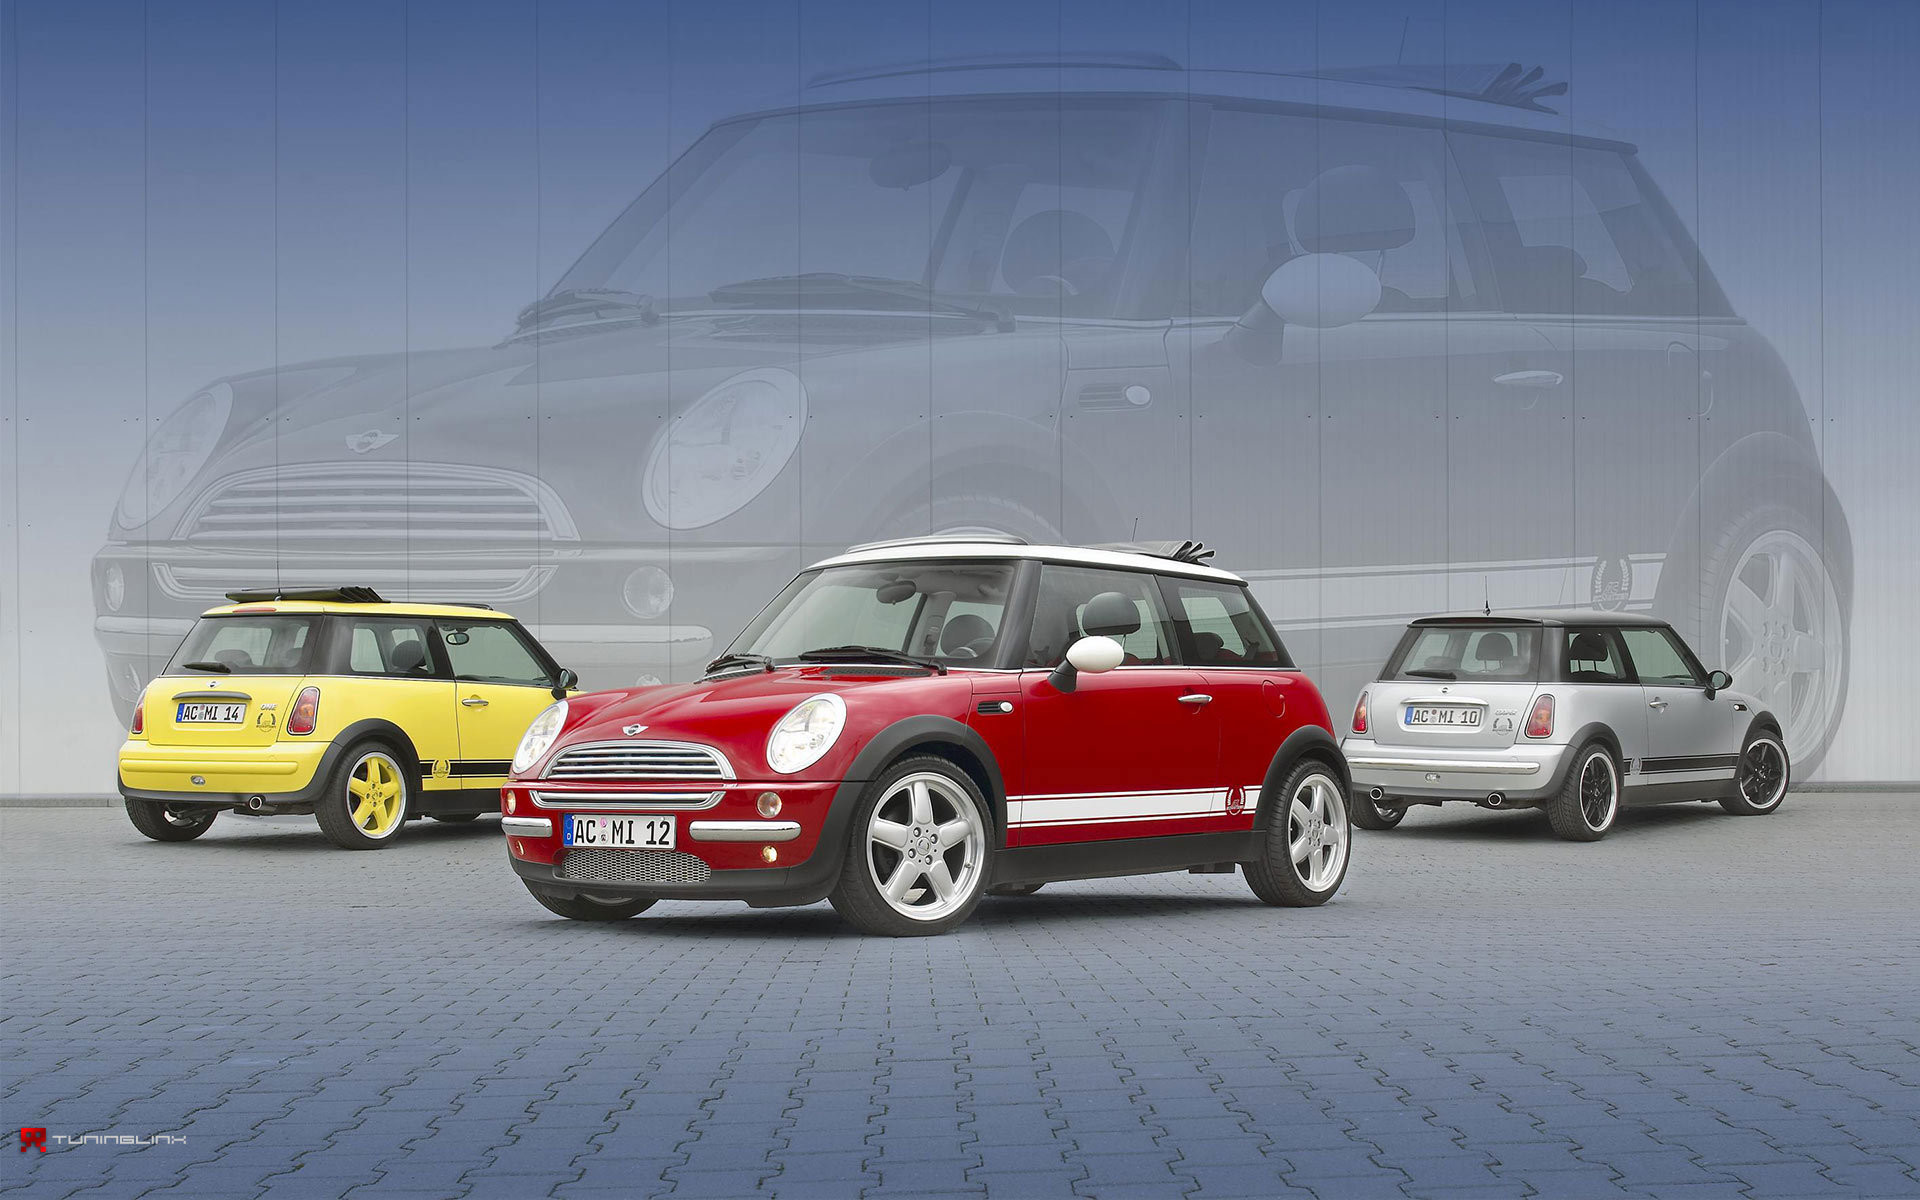 1920x1200 Mini Cooper images Mini Cooper HD wallpaper and background photos